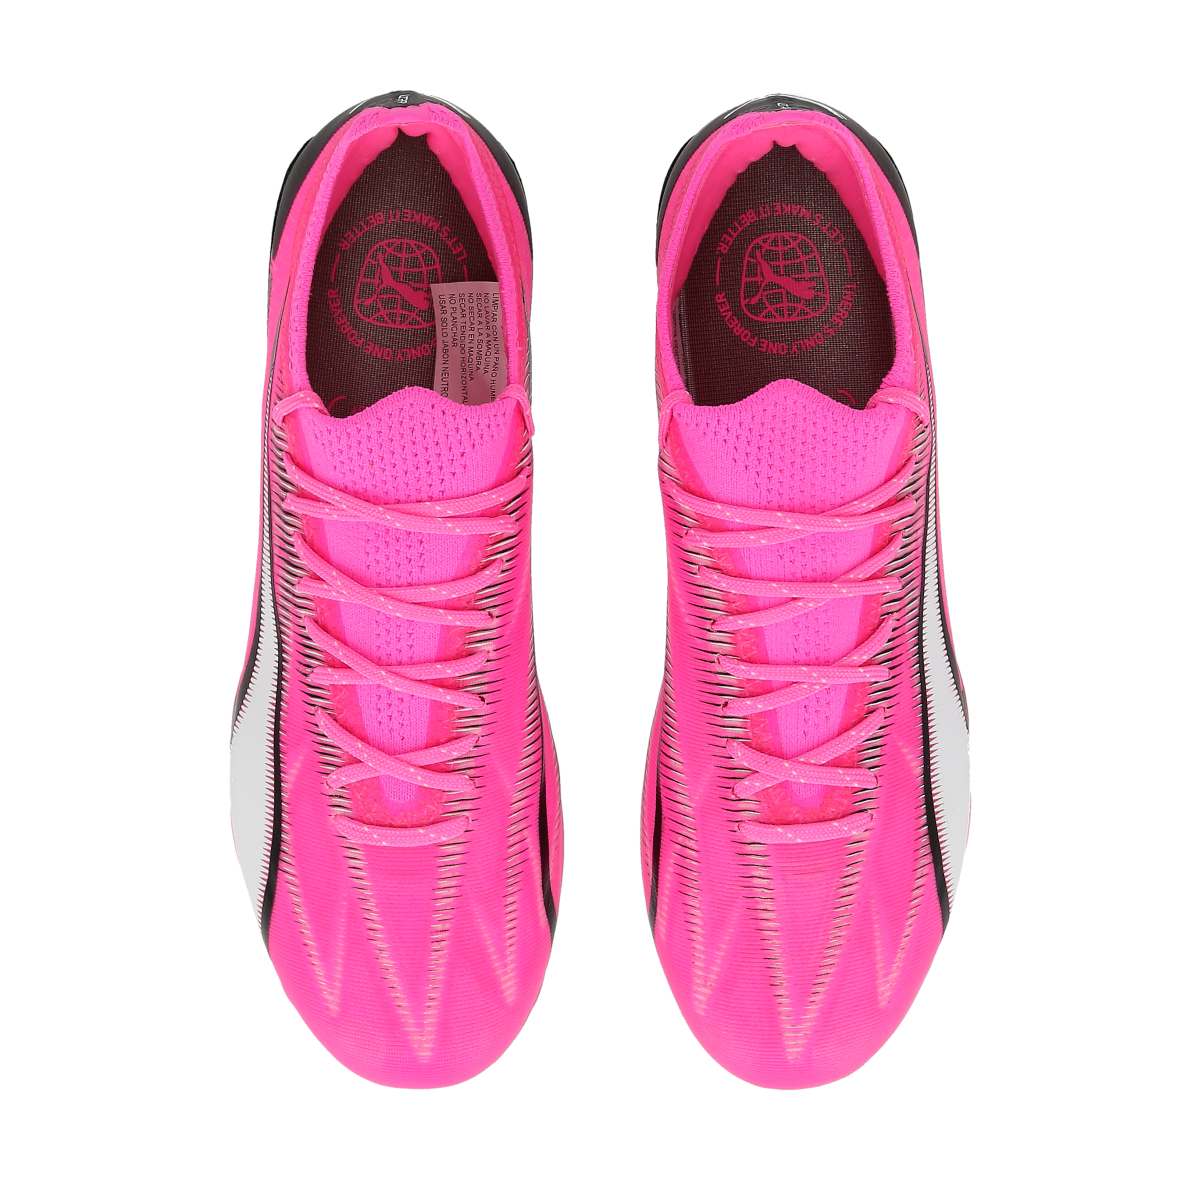 Botines Fútbol Puma Ultra Ultimate Fg/Ag Mujer,  image number null